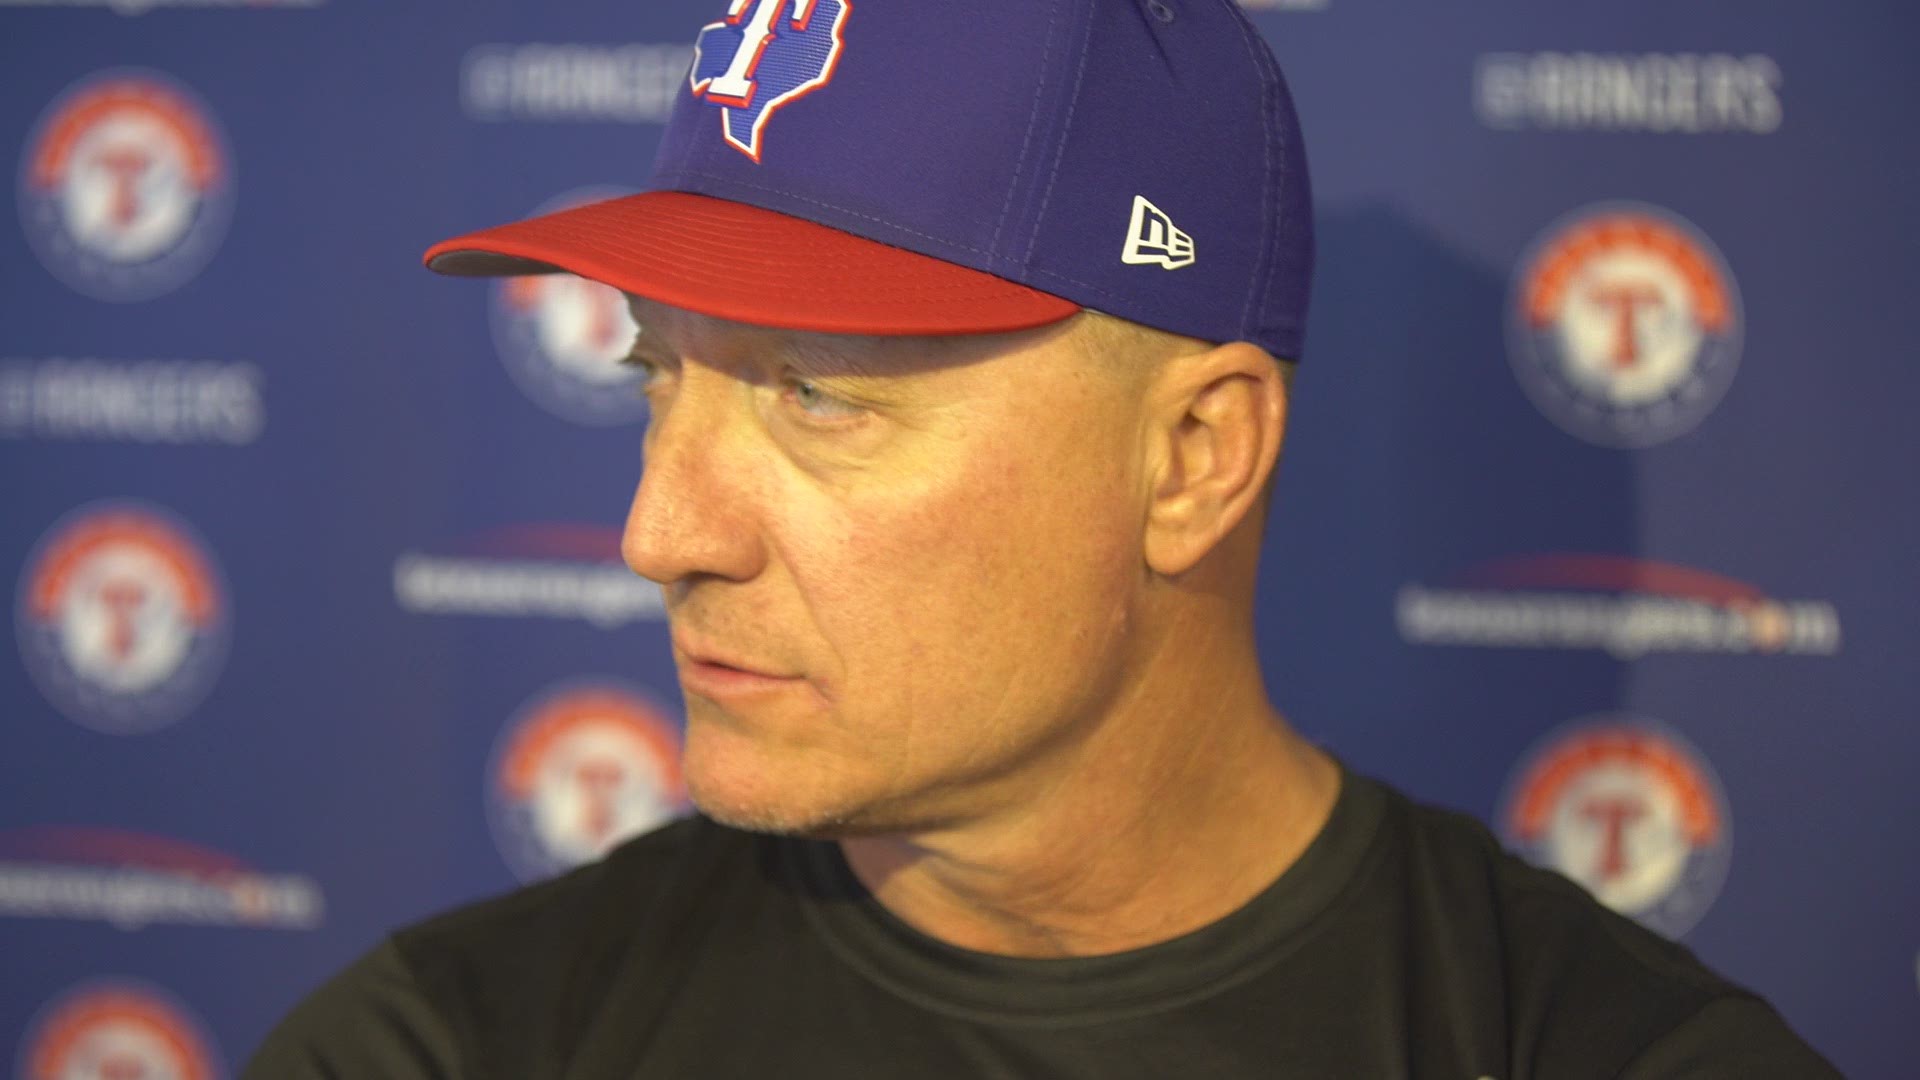 The Rangers will join other Major League teams during the first weekend of Spring Training games in wearing special hats to honor the Florida school shooting victims.